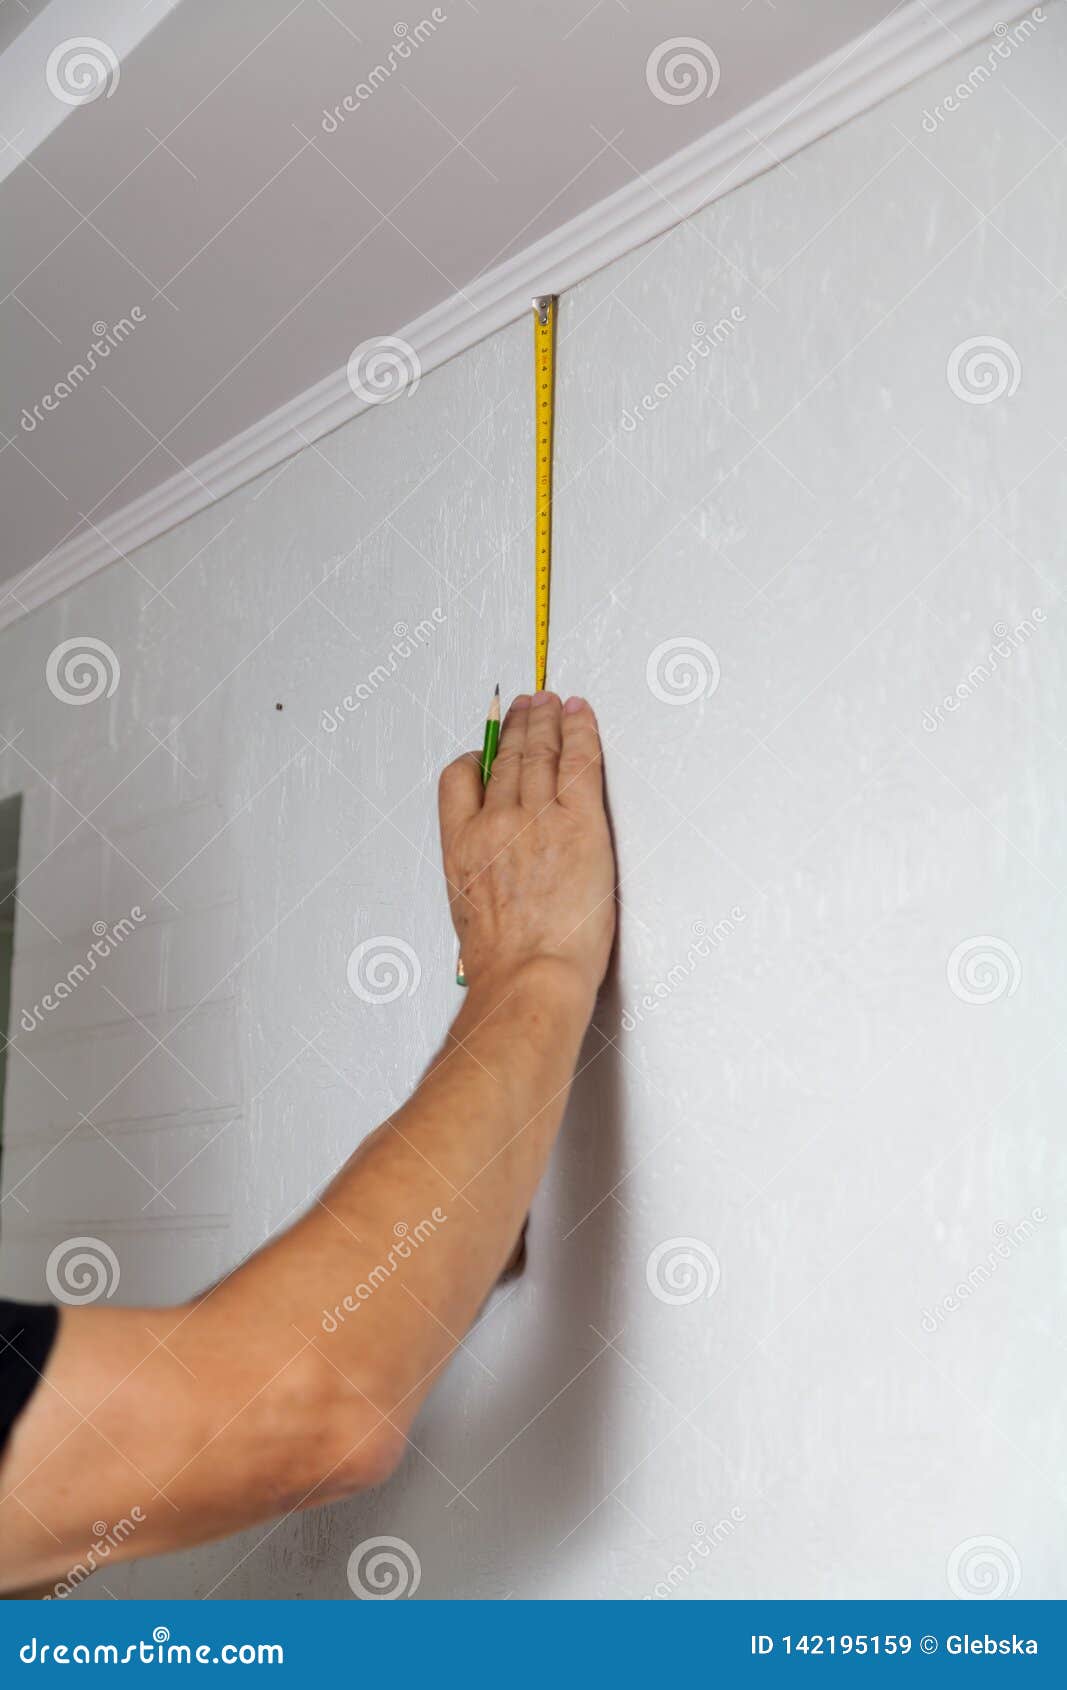 Hands Make Wall Marking With Tape Measure And Pencil Stock Image